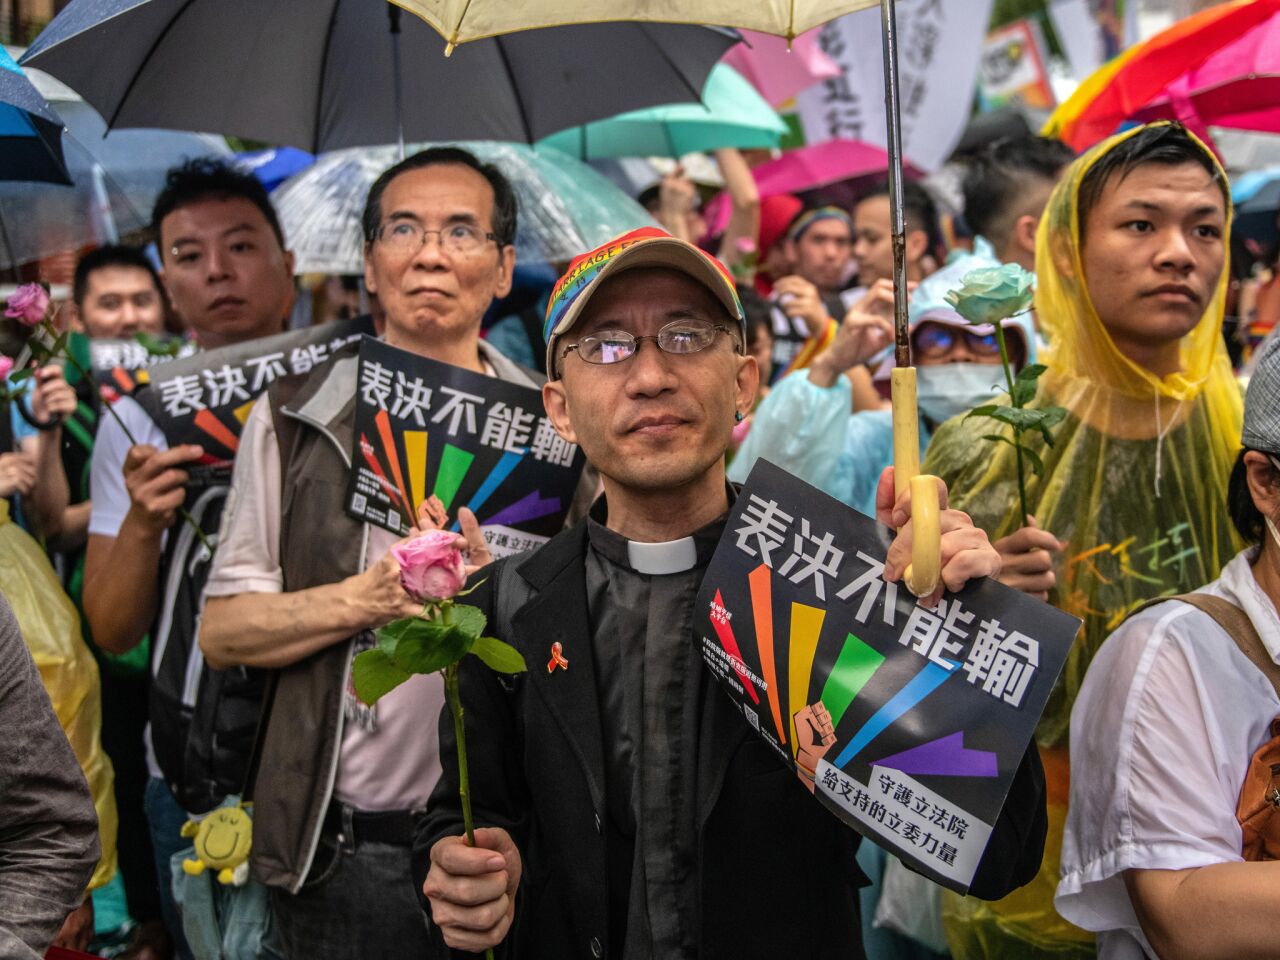 A priest waits with others outside Taiwan's parliament in Taipei awaiting a vote on legalizing same-sex marriage.